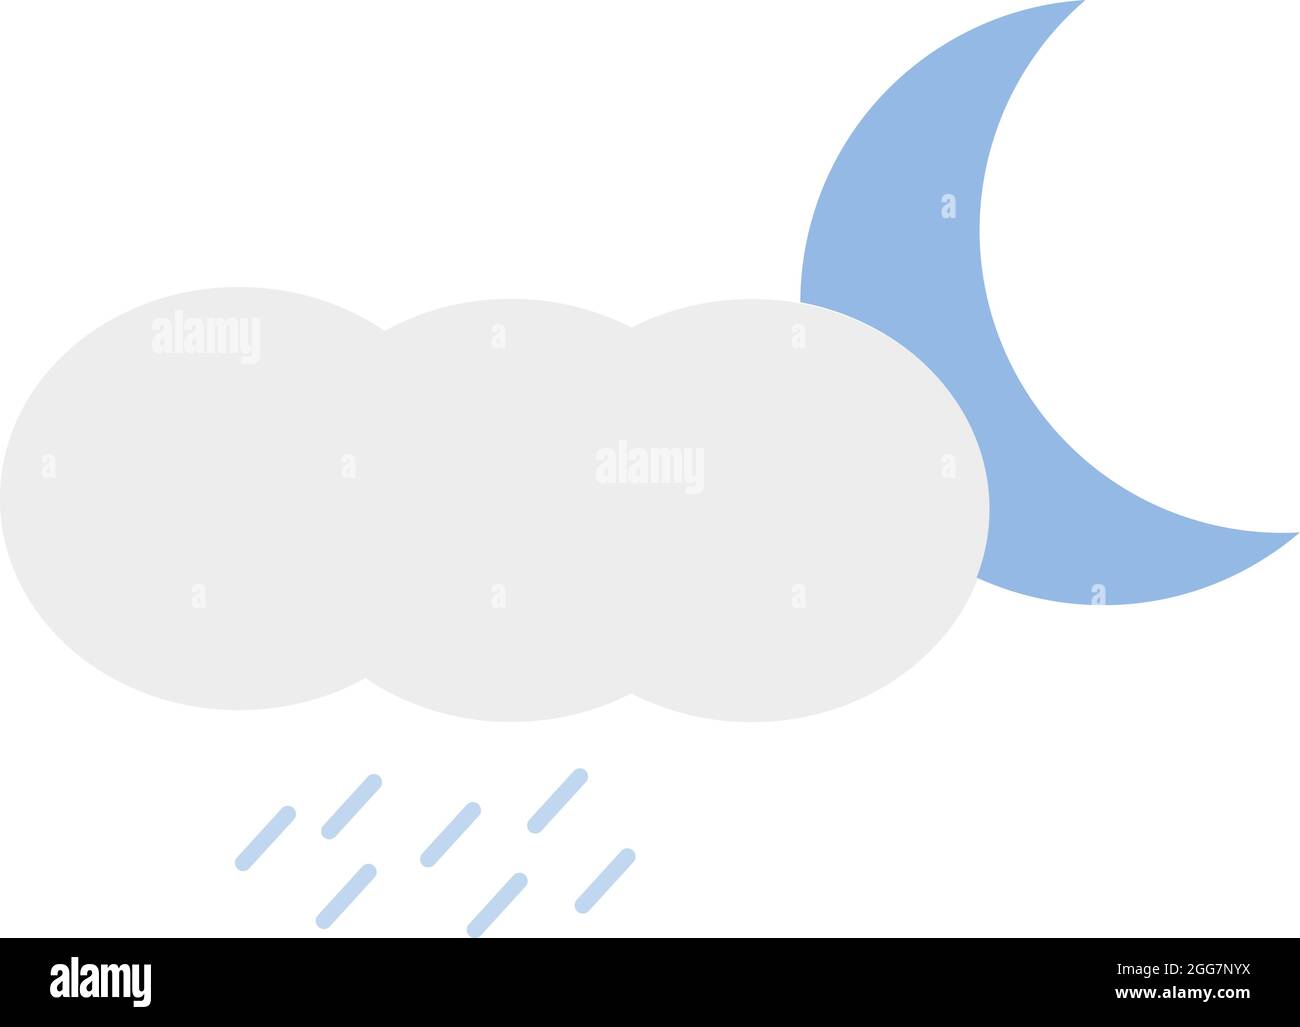 Young moon with cloud of heavy rain, icon illustration, vector on white background Stock Vector